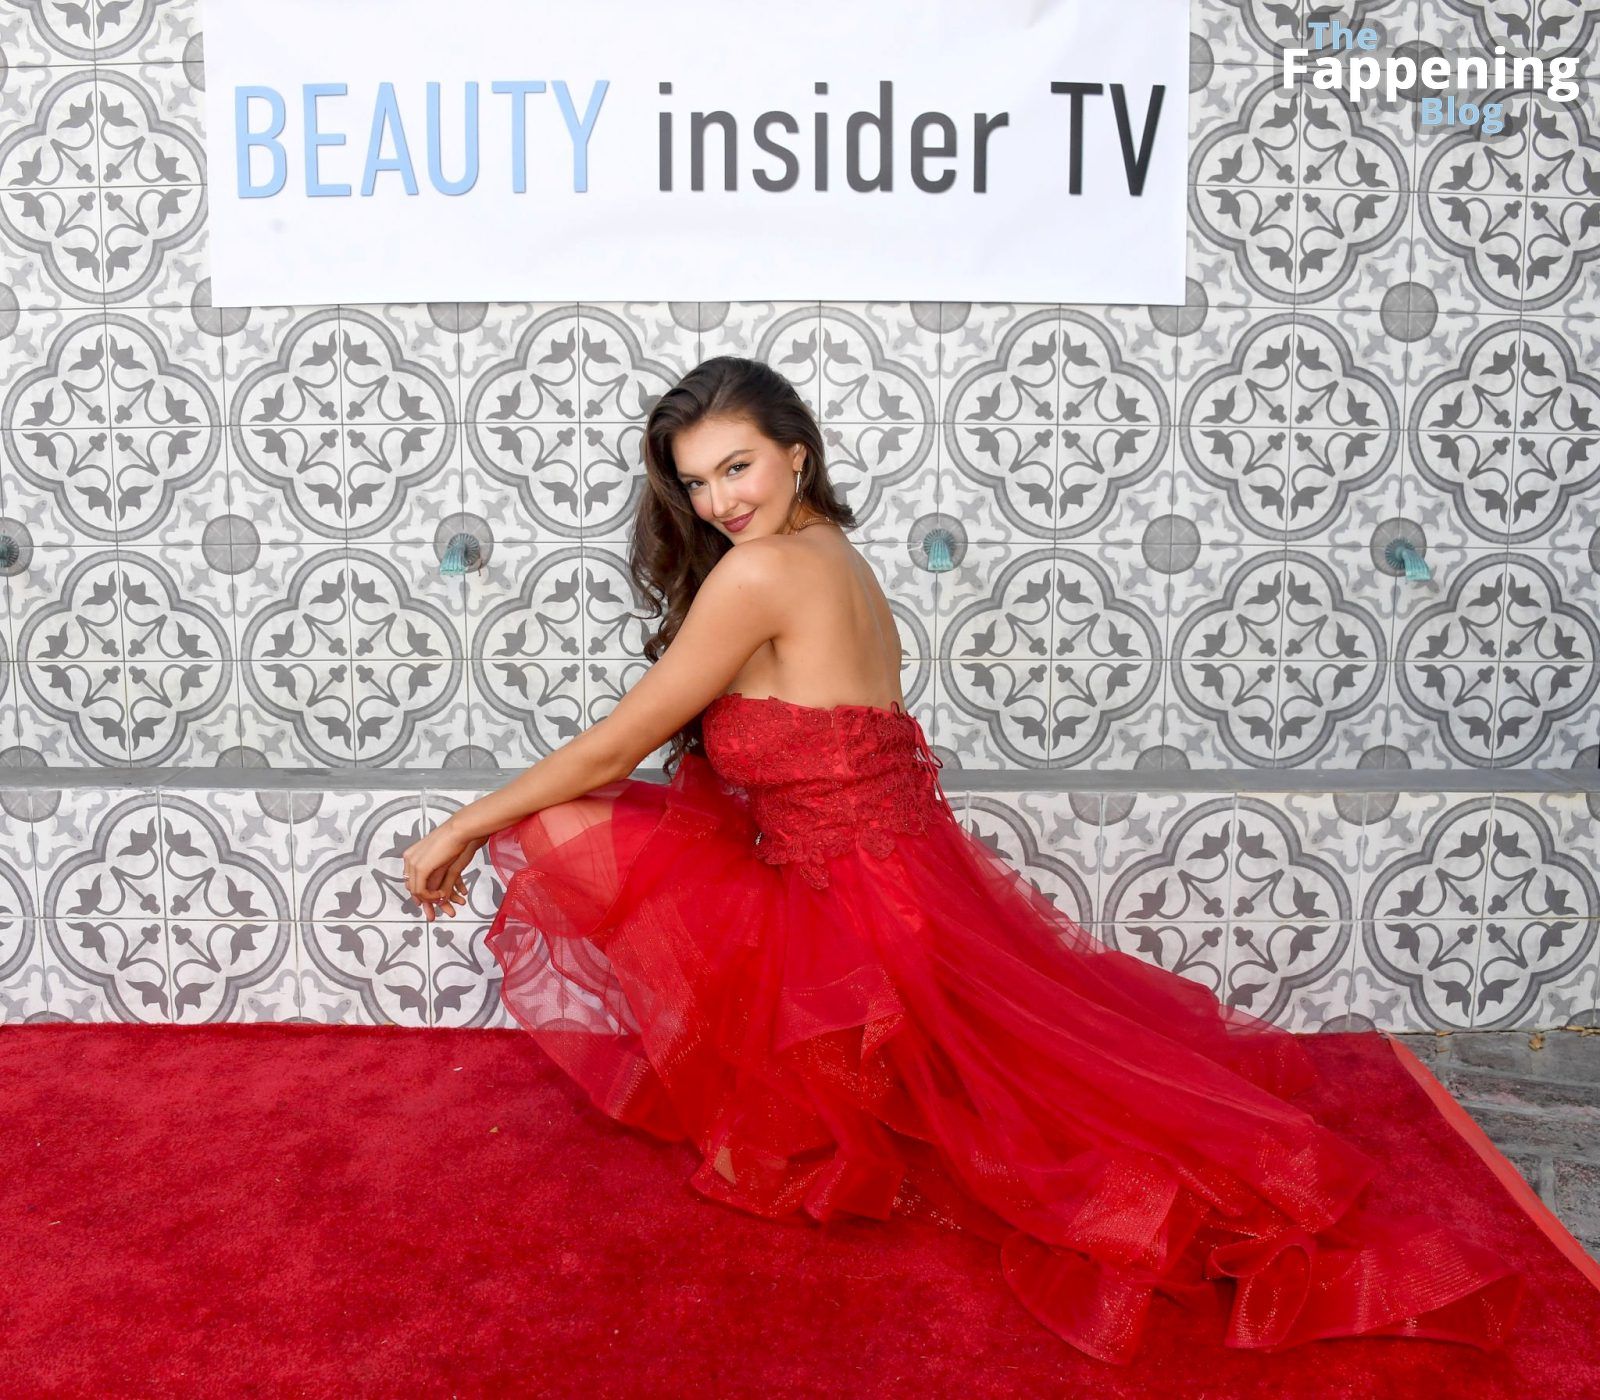 Rachel Pizzolato Flaunts Her Beautiful Figure in a Red Dress (20 Photos)